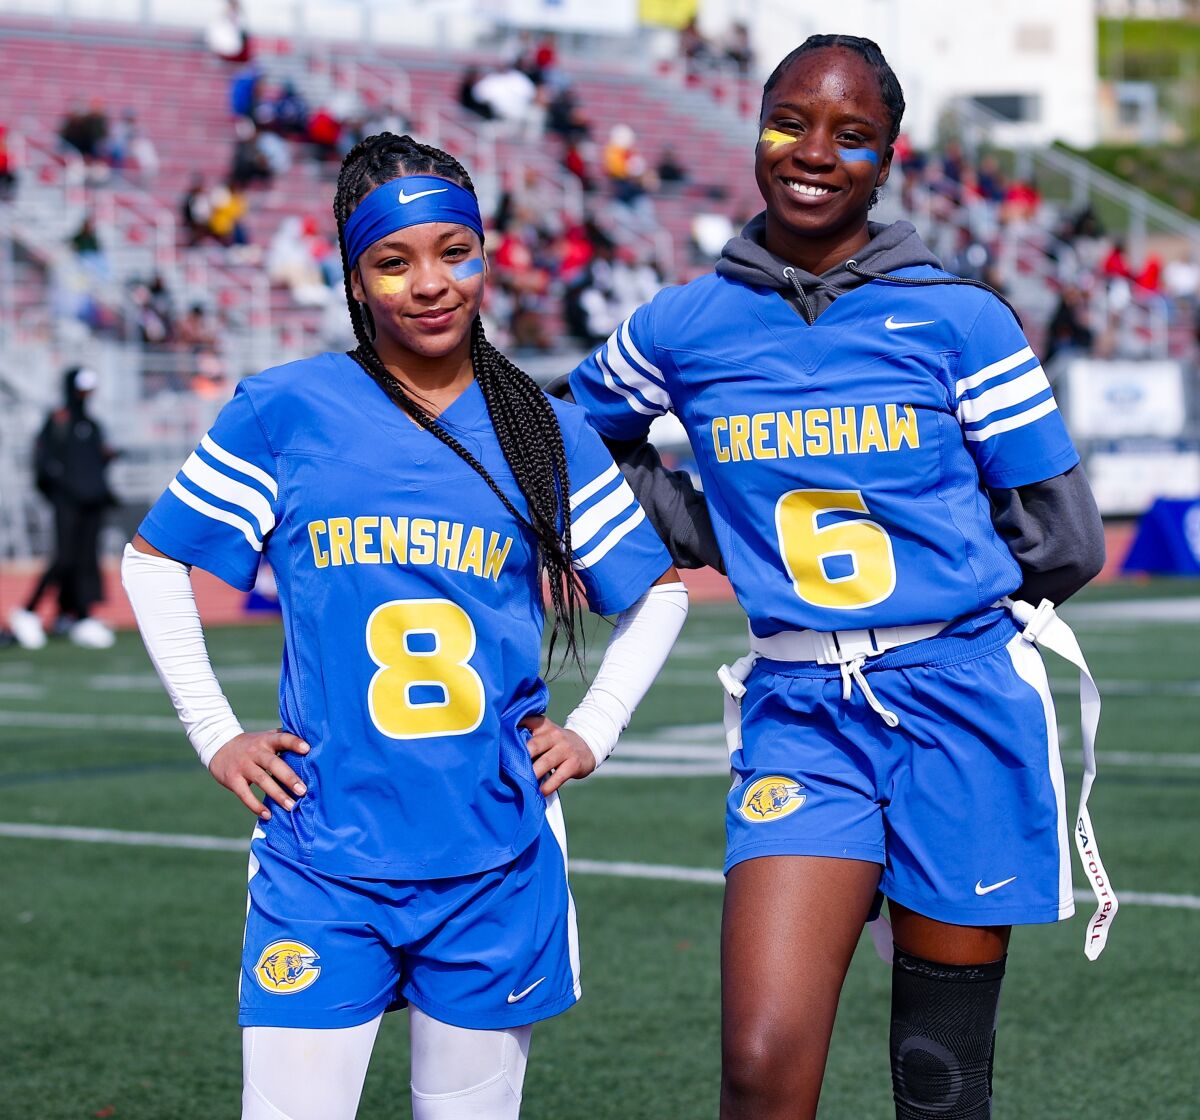 Crenshaw High running back De'Chelle Brackett and wide receiver Imani Taylor-Wise pose for a photo.